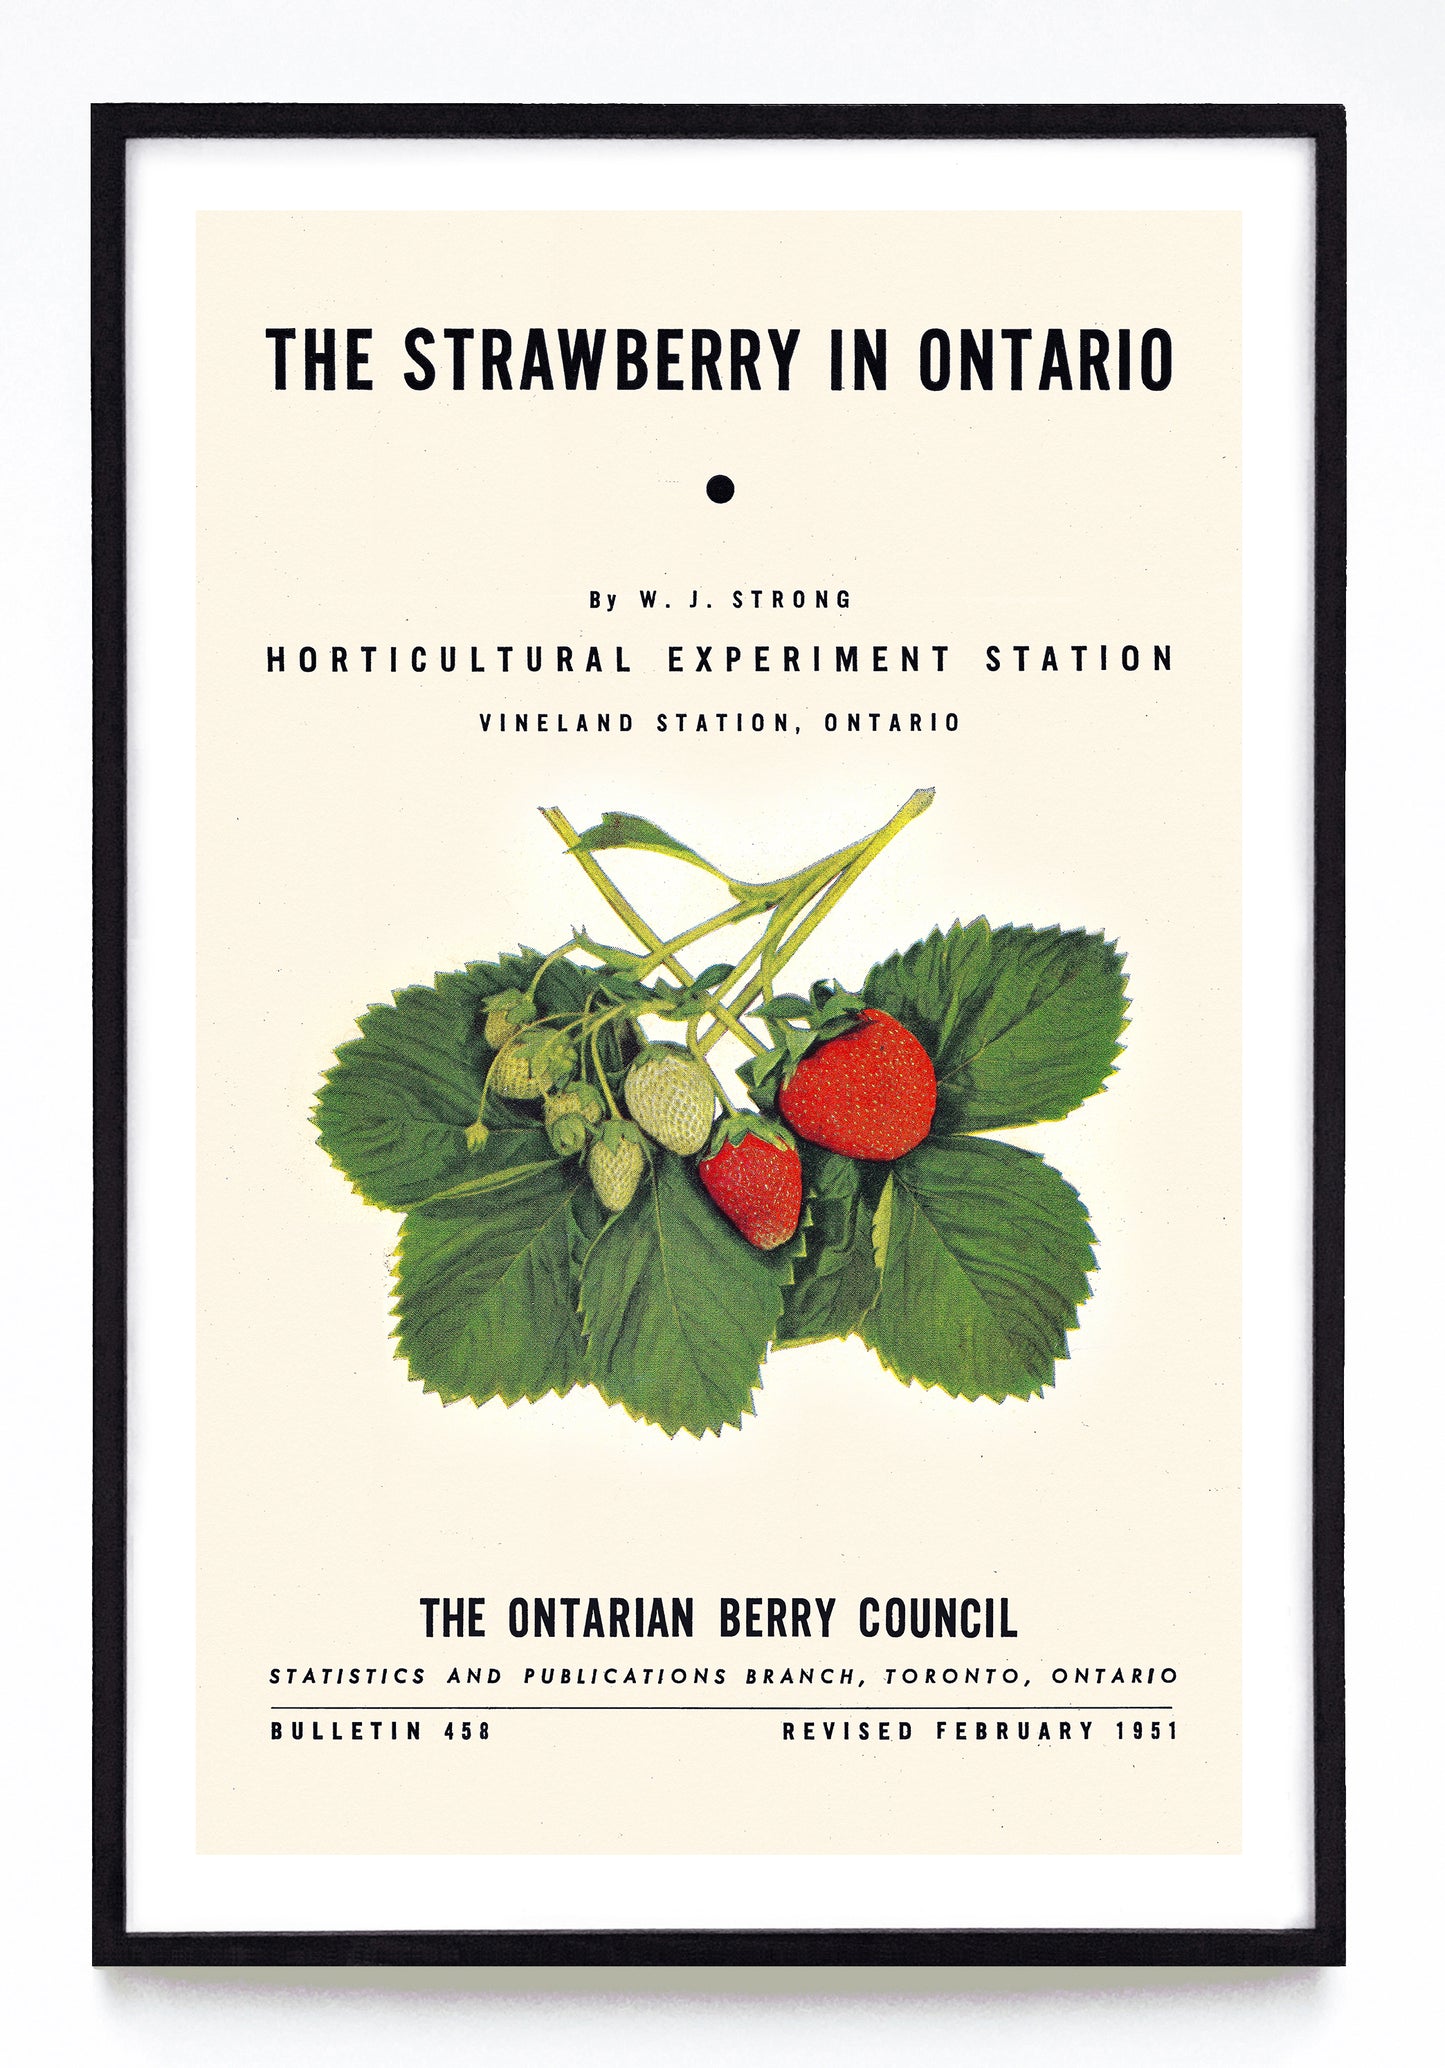 "The Strawberry in Ontario" print (1951)